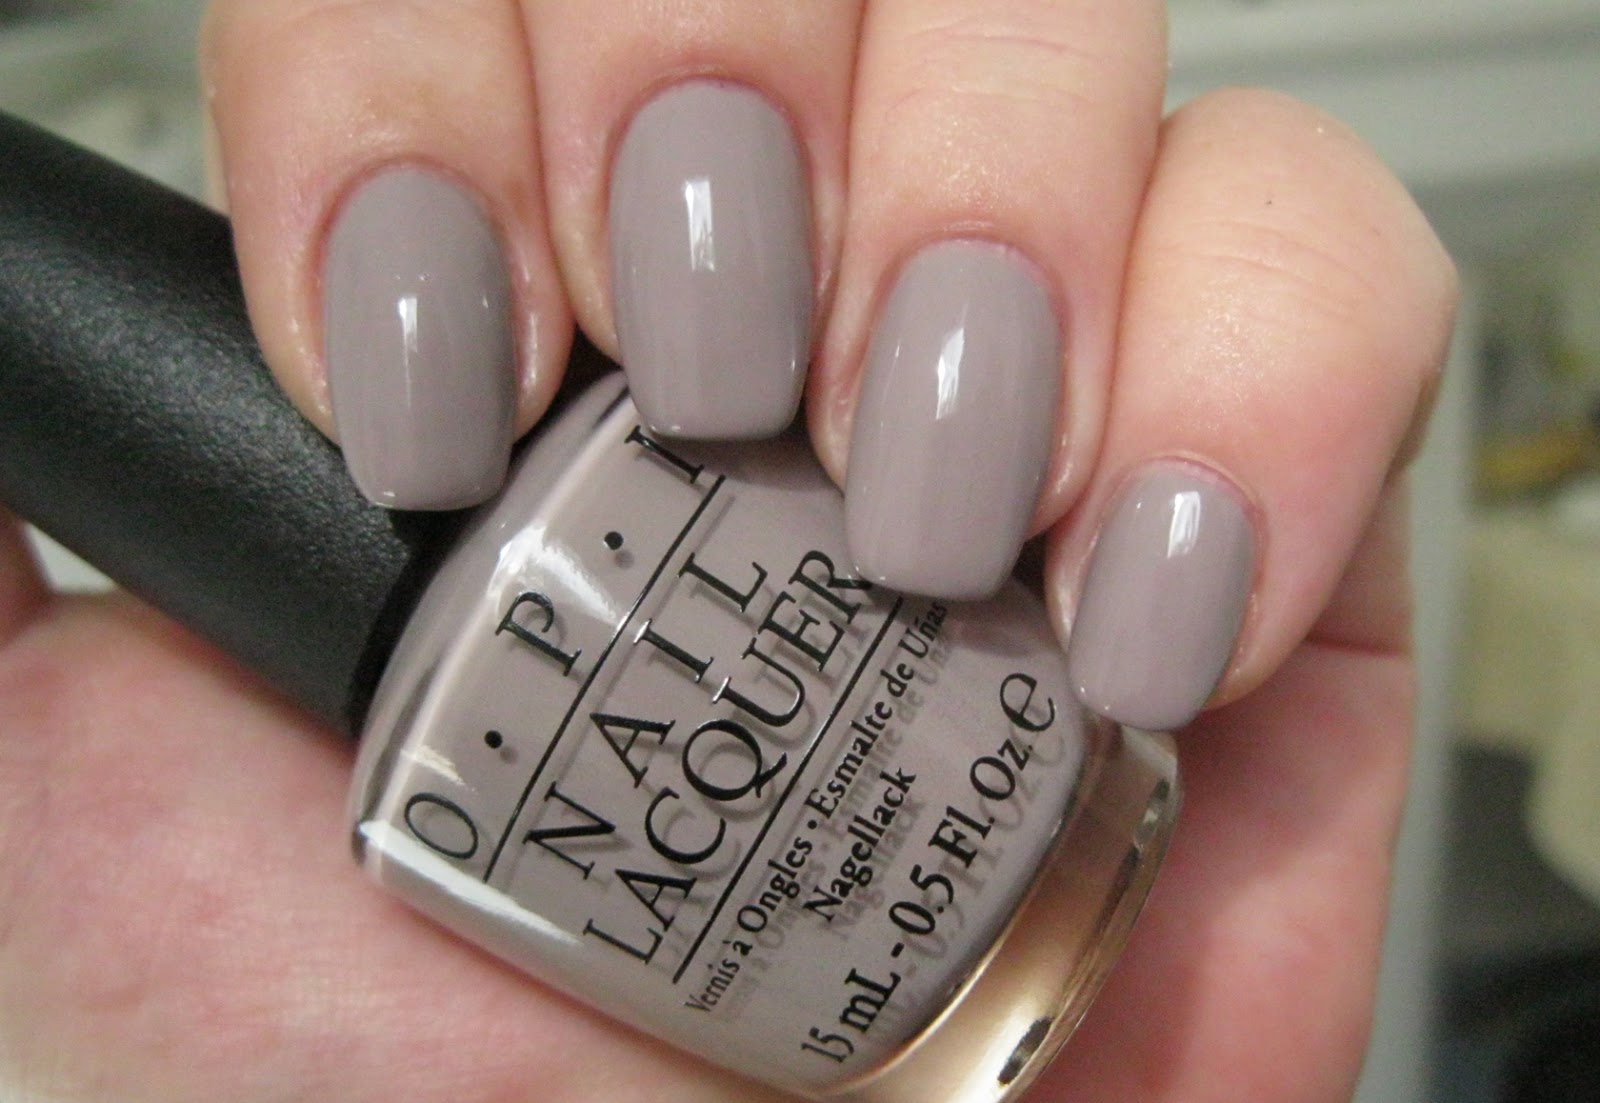 1. OPI Nail Lacquer in "Taupe-less Beach" - wide 8